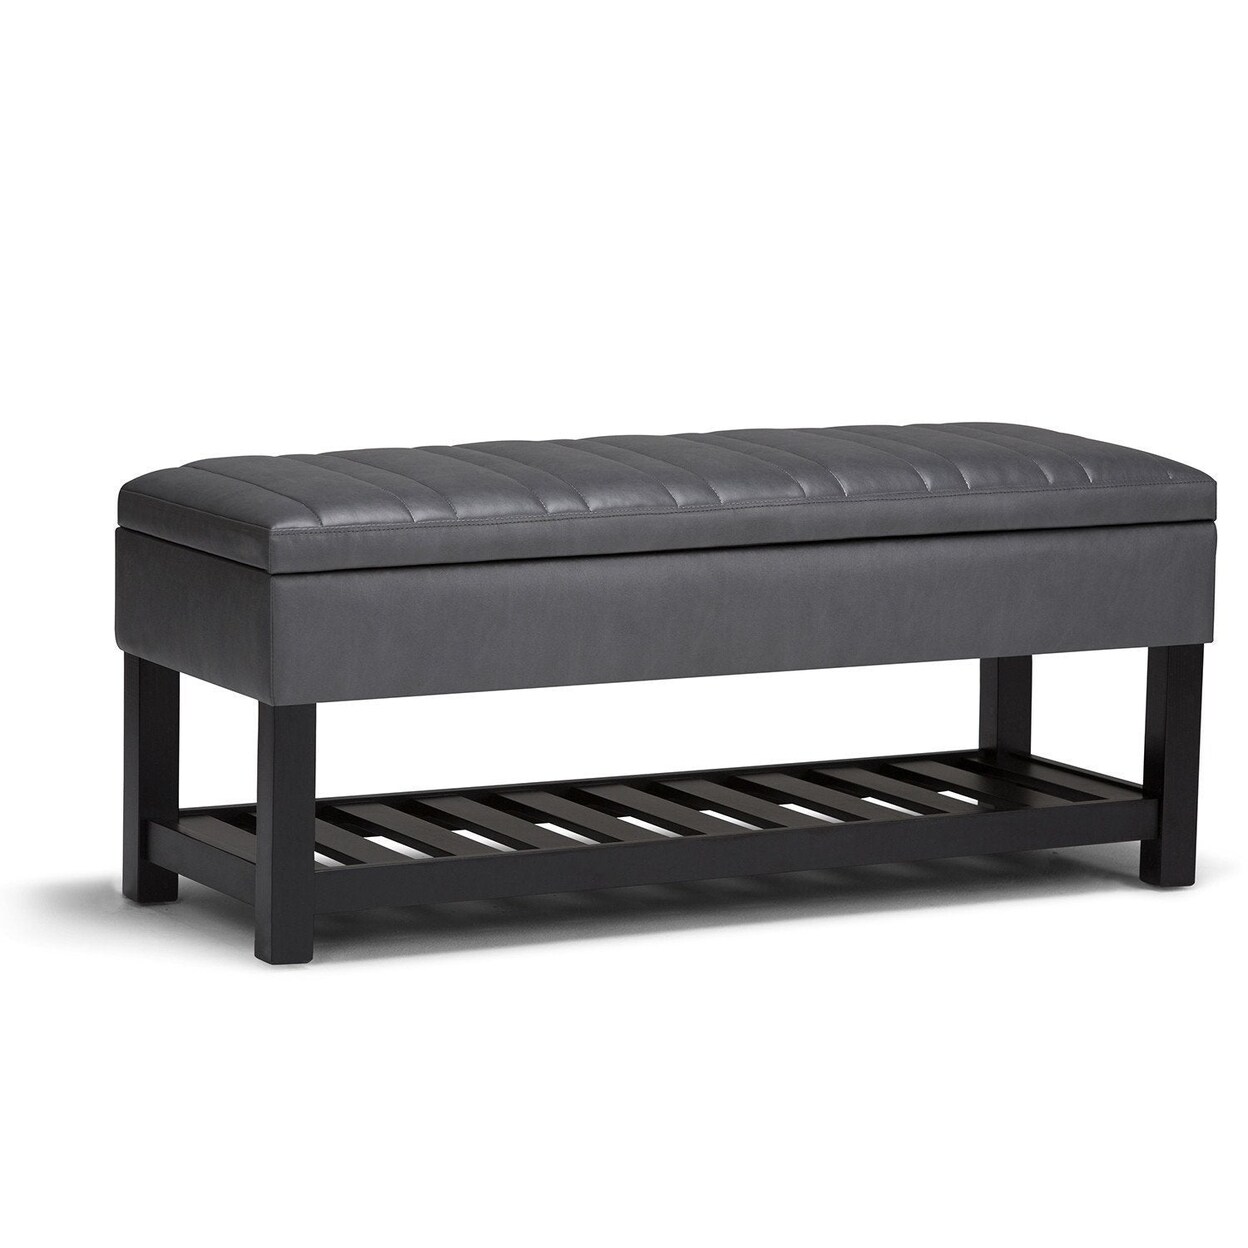 Simpli Home CLEAR Memphis Ottoman Bench in Vegan Leather